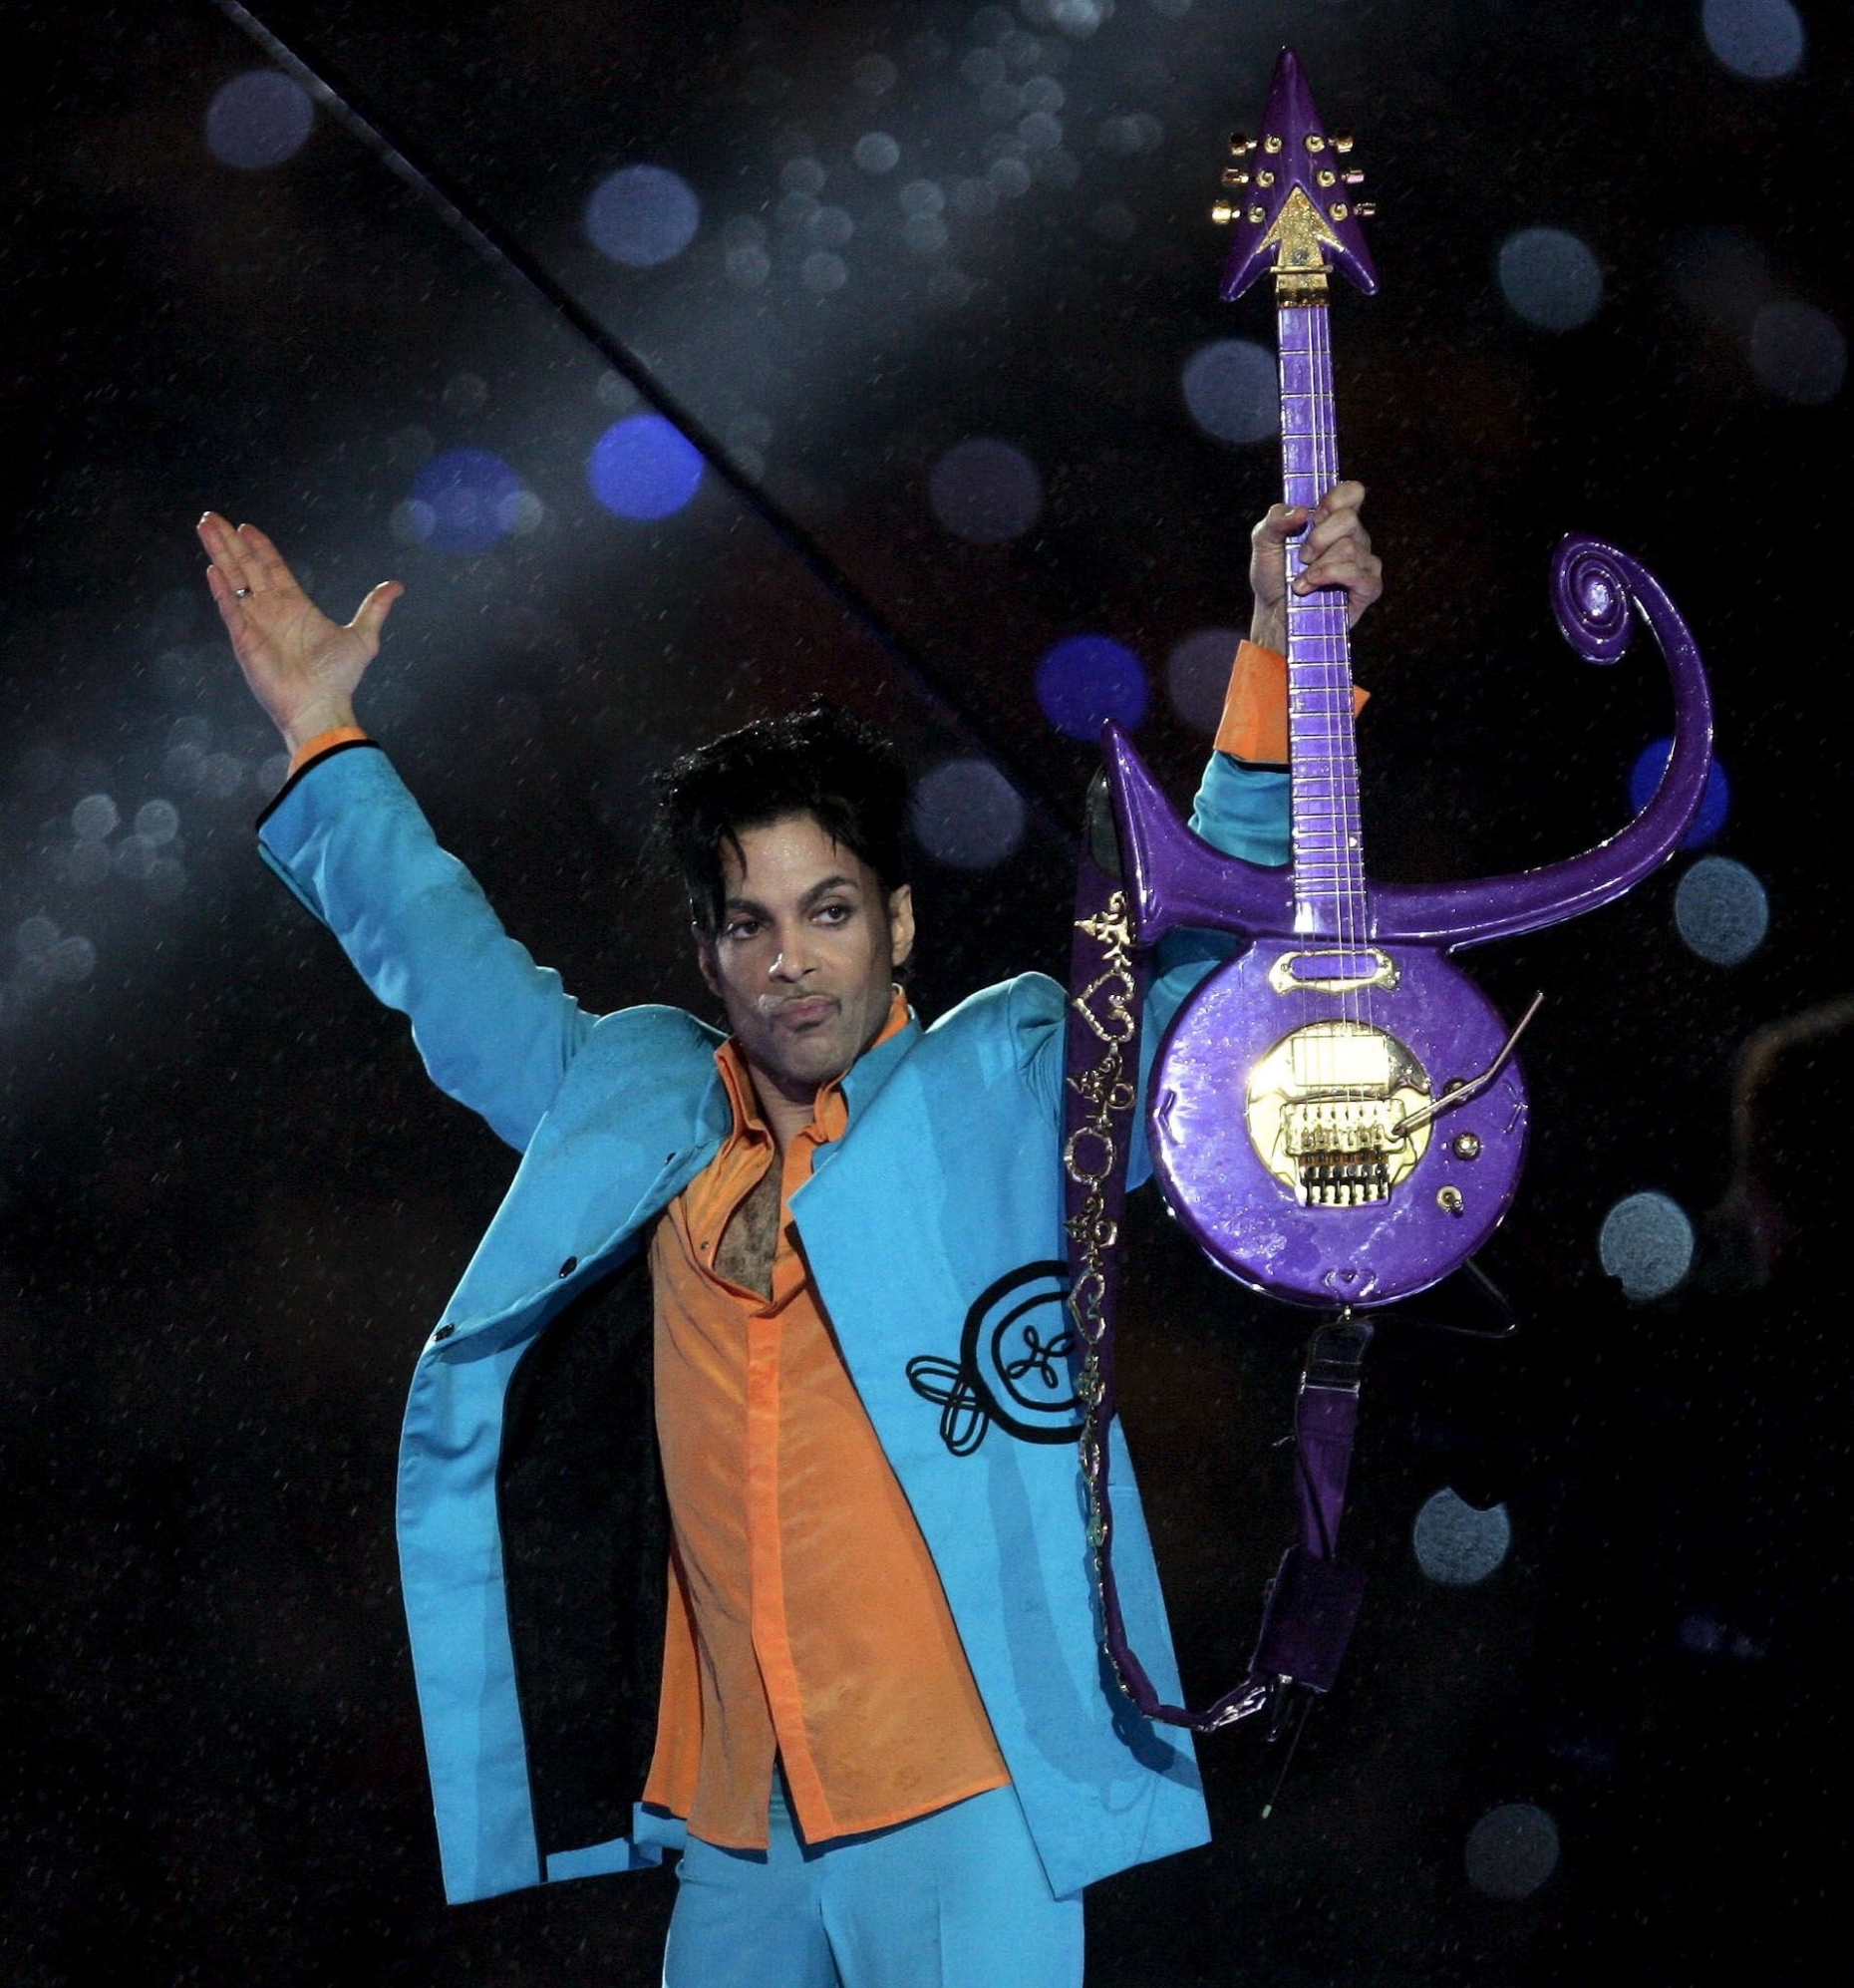 <p>The late, great Prince still holds some impressive records. After his unfortunate death in 2016, <a href="https://www.forbes.com/sites/hughmcintyre/2016/05/30/after-his-death-prince-broke-another-impressive-chart-record-that-didnt-get-much-attention/?sh=5599cb8e292e">19 of his albums held a position on the <em>Billboard</em> 200</a> in a single week (May 14). That’s the most ever, smashing the record of 13 set by The Beatles in 2014. That means nearly 10 per cent of all the albums on the chart at that time were Prince albums—simply incredible.</p>